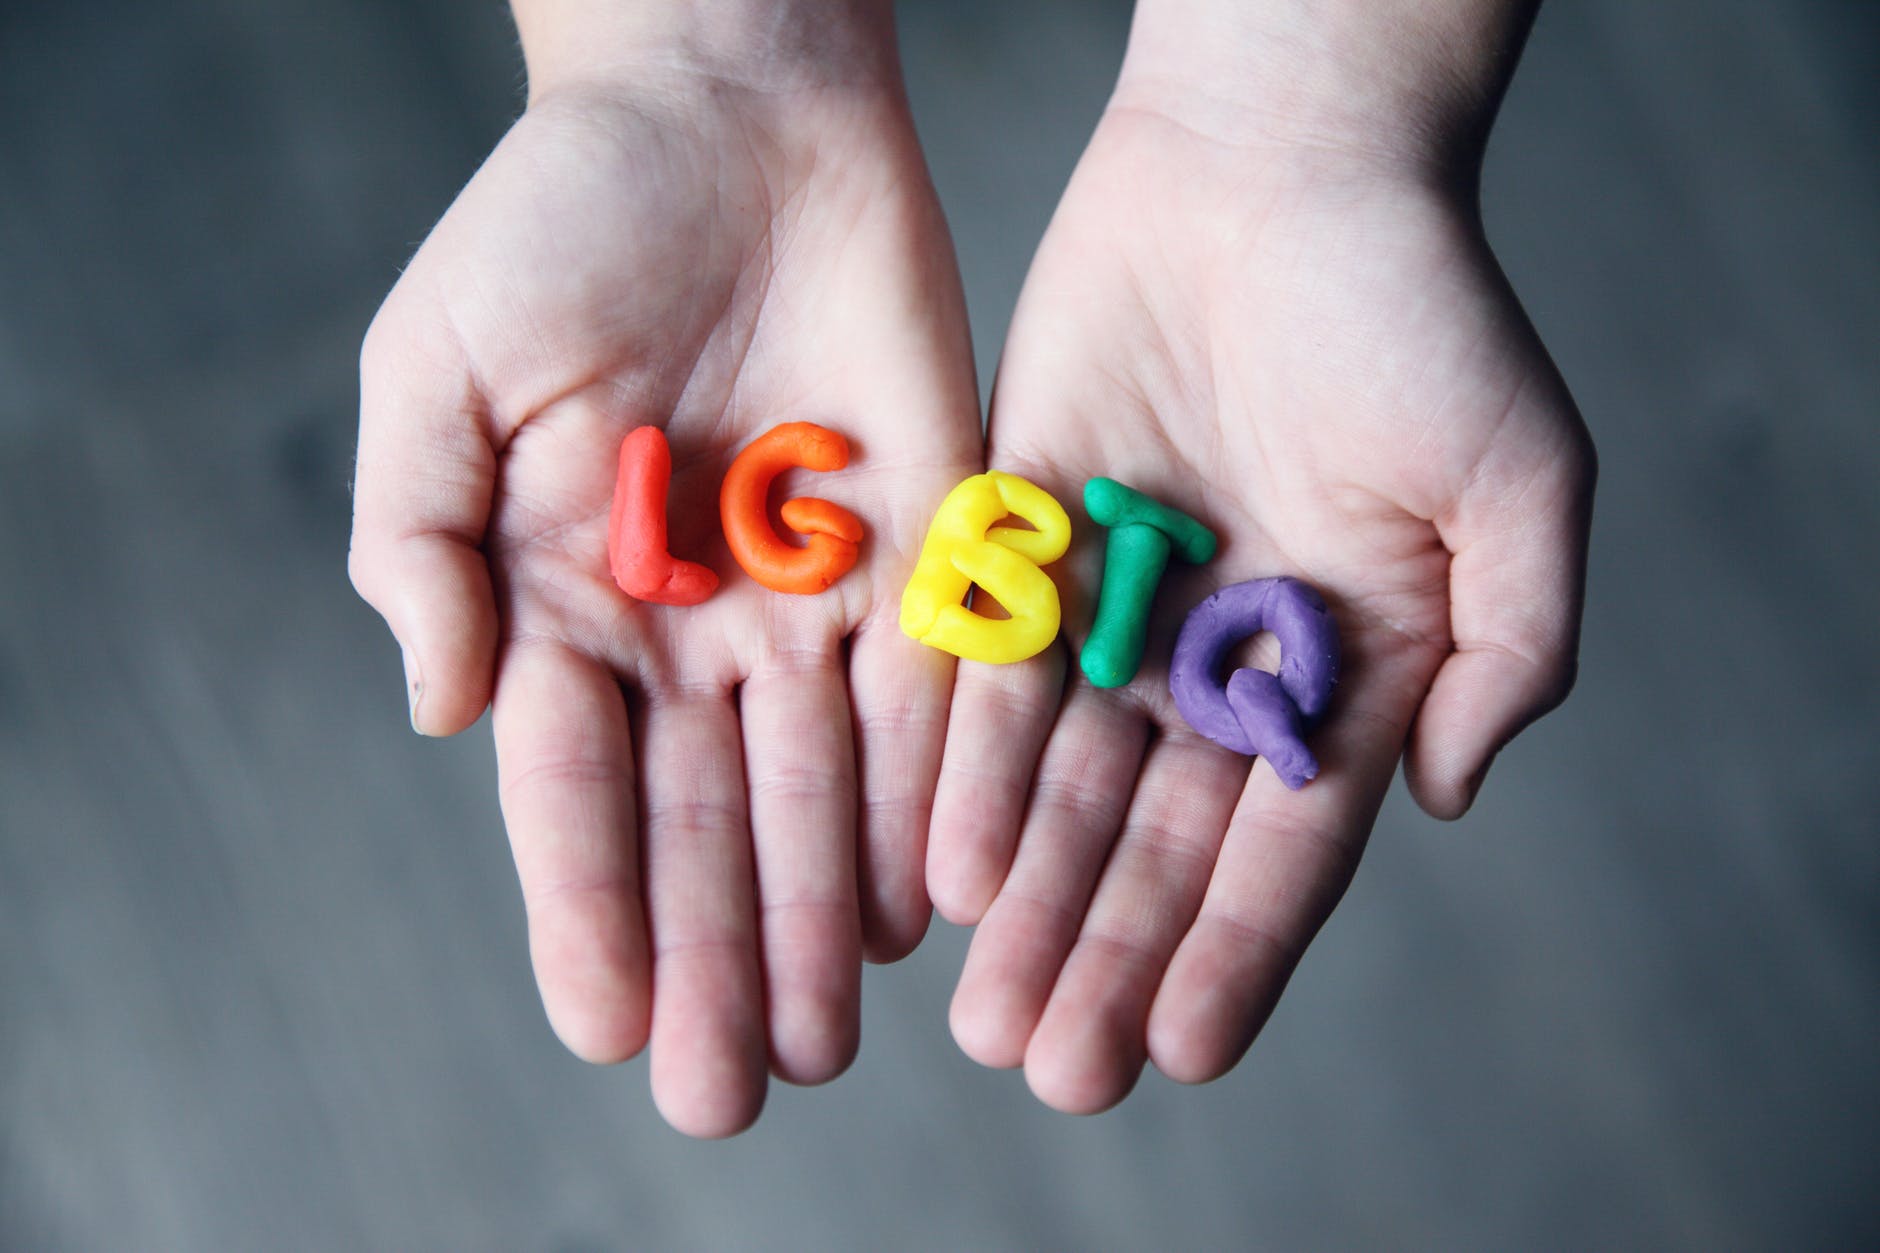 #JamesDonaldson On #MentalHealth – #LGBTQ #Youth: Discrimination #Trauma May Increase #SuicideRisk By More Than 3 Times